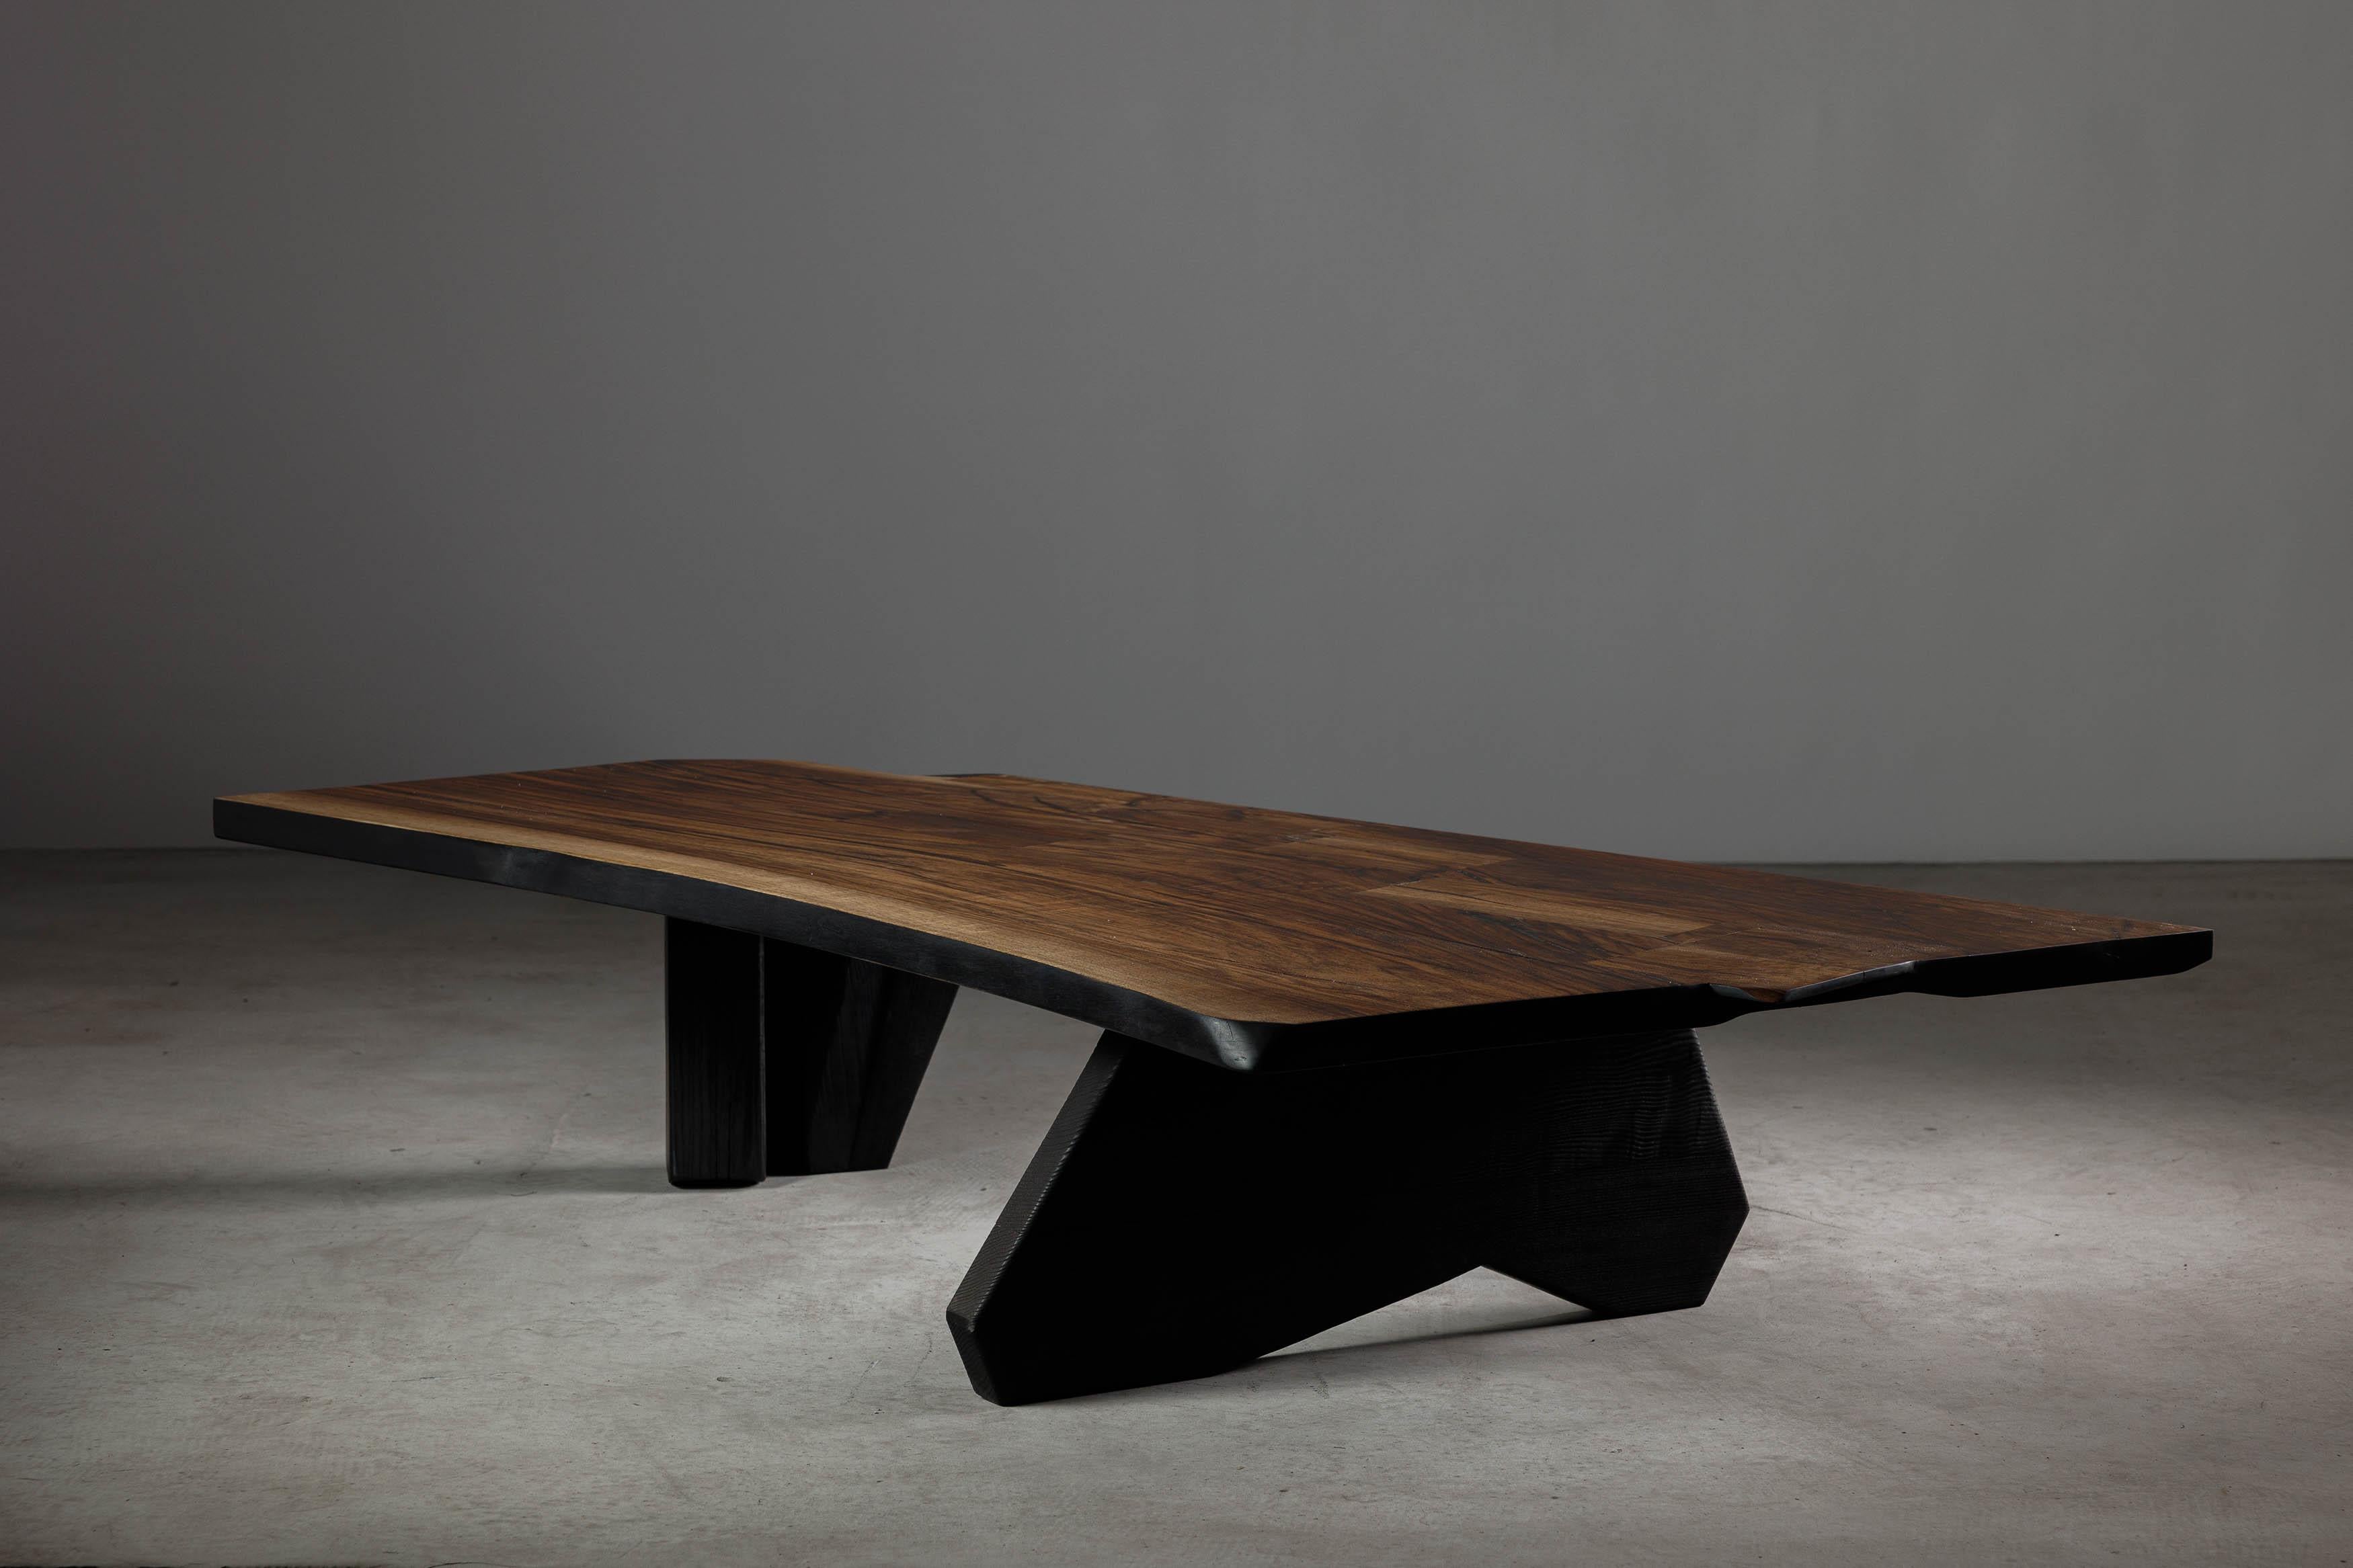 EM104 coffee table by Eero Moss
One of a kind
Dimensions; W 144 x D 87 x H 33 cm
Materials: Walnut, charred ash, India ink.
Finish: Natural oils.

18 Brut Collection

The latest collection by the artist is a tribute to the brutalist